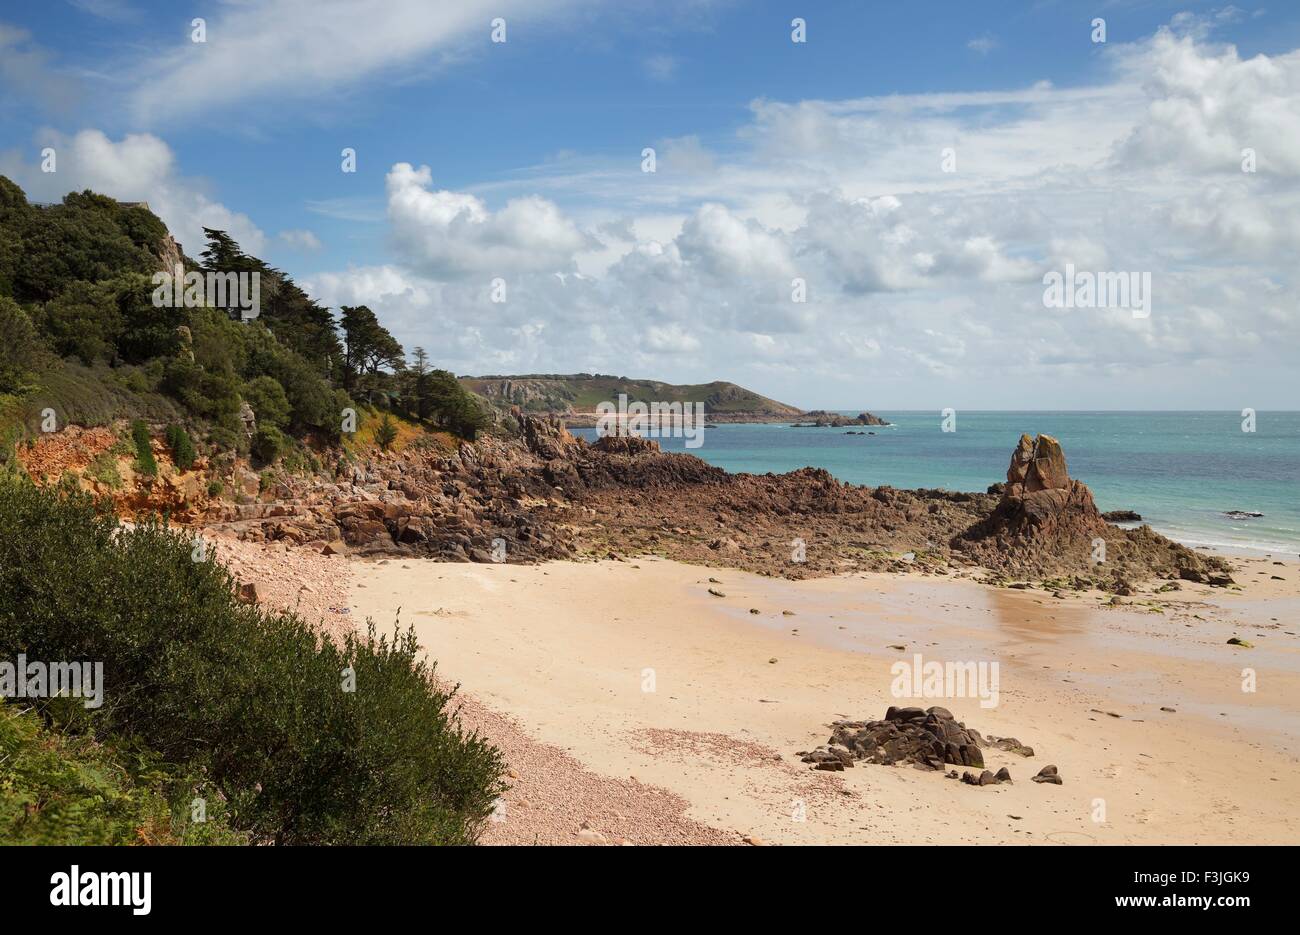 Overlooking Beauport Bay, Jersey, Channel Islands, Great Britain Stock Photo